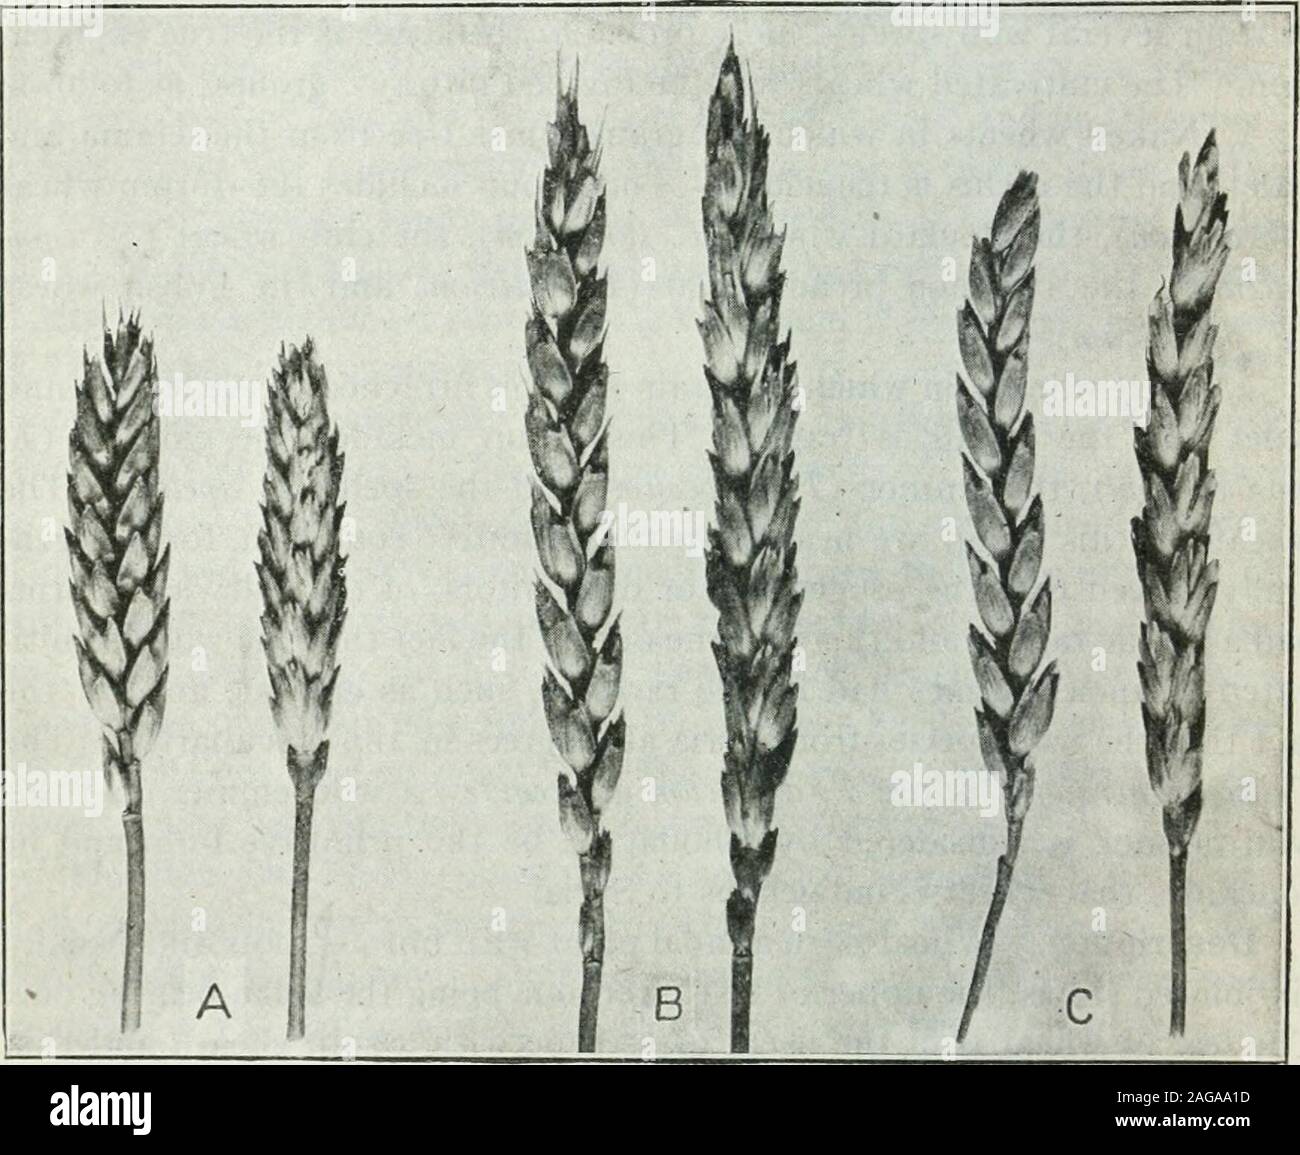 . Textbook of pastoral and agricultural botany, for the study of the injurious and useful plants of country and farm. h spikelet has two broad glumes atthe base. The lemmas are awned, or beardless, that is awnless. Thereare three stamens and an ovary with two feathery styles. Two lodiculesare present. In northern cold, or wet climates, close poHination is therule with wheat, but in durum wheats cross pollination is habitual, andthis seems to be the case with primitive wheats and those grown in hot,dry locaUties. The mature grain has a tuft of hairs, the brush, at thesmall (stigmatic) end of th Stock Photo